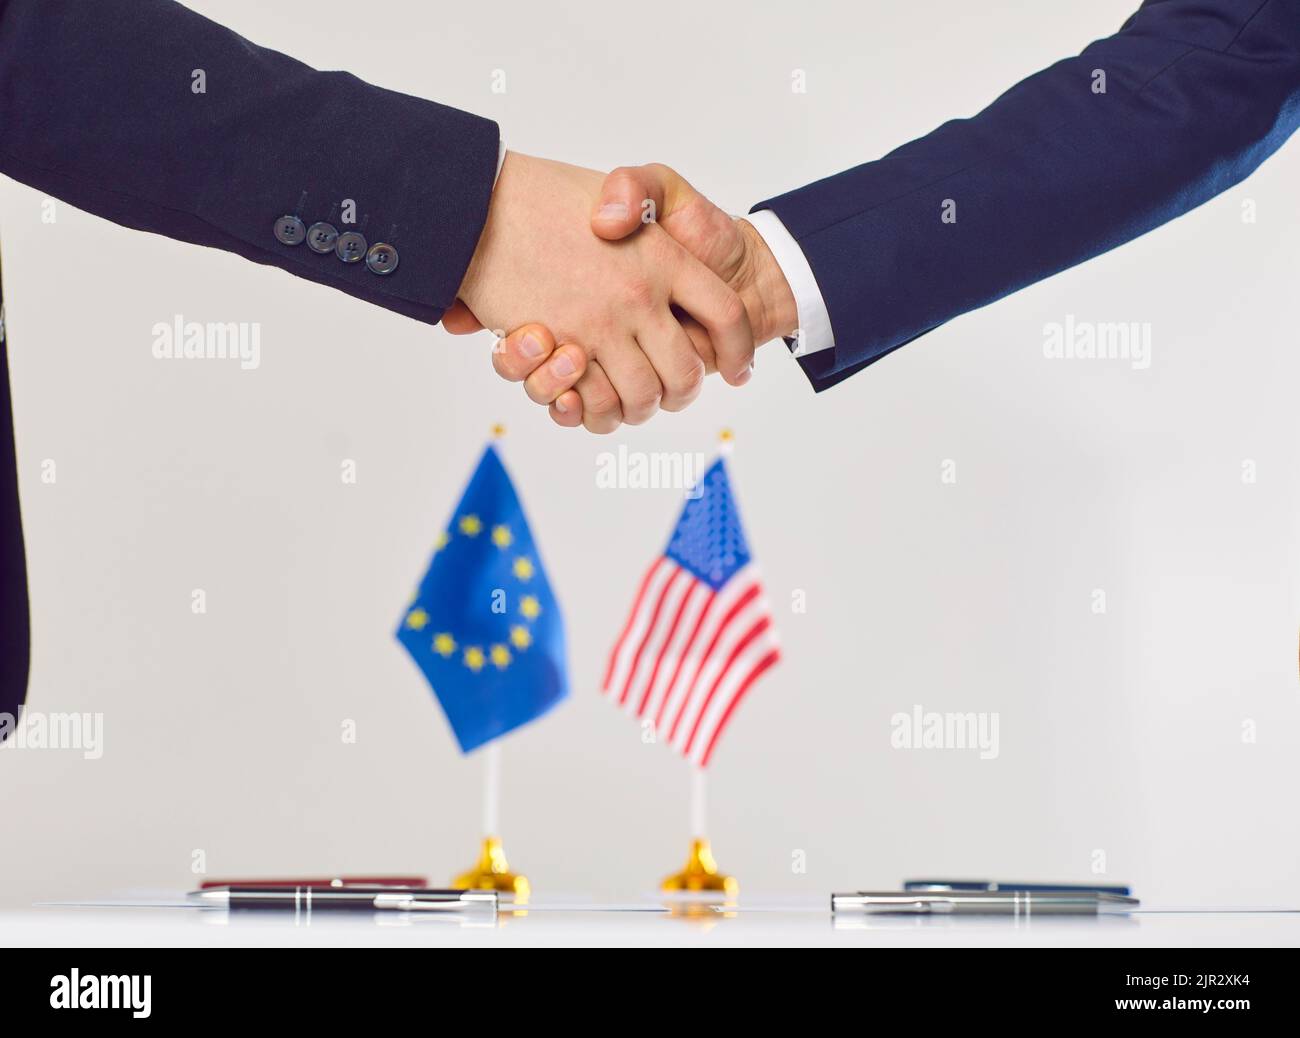 Two diplomats or politicians from USA and European Union shake hands at negotiation table Stock Photo